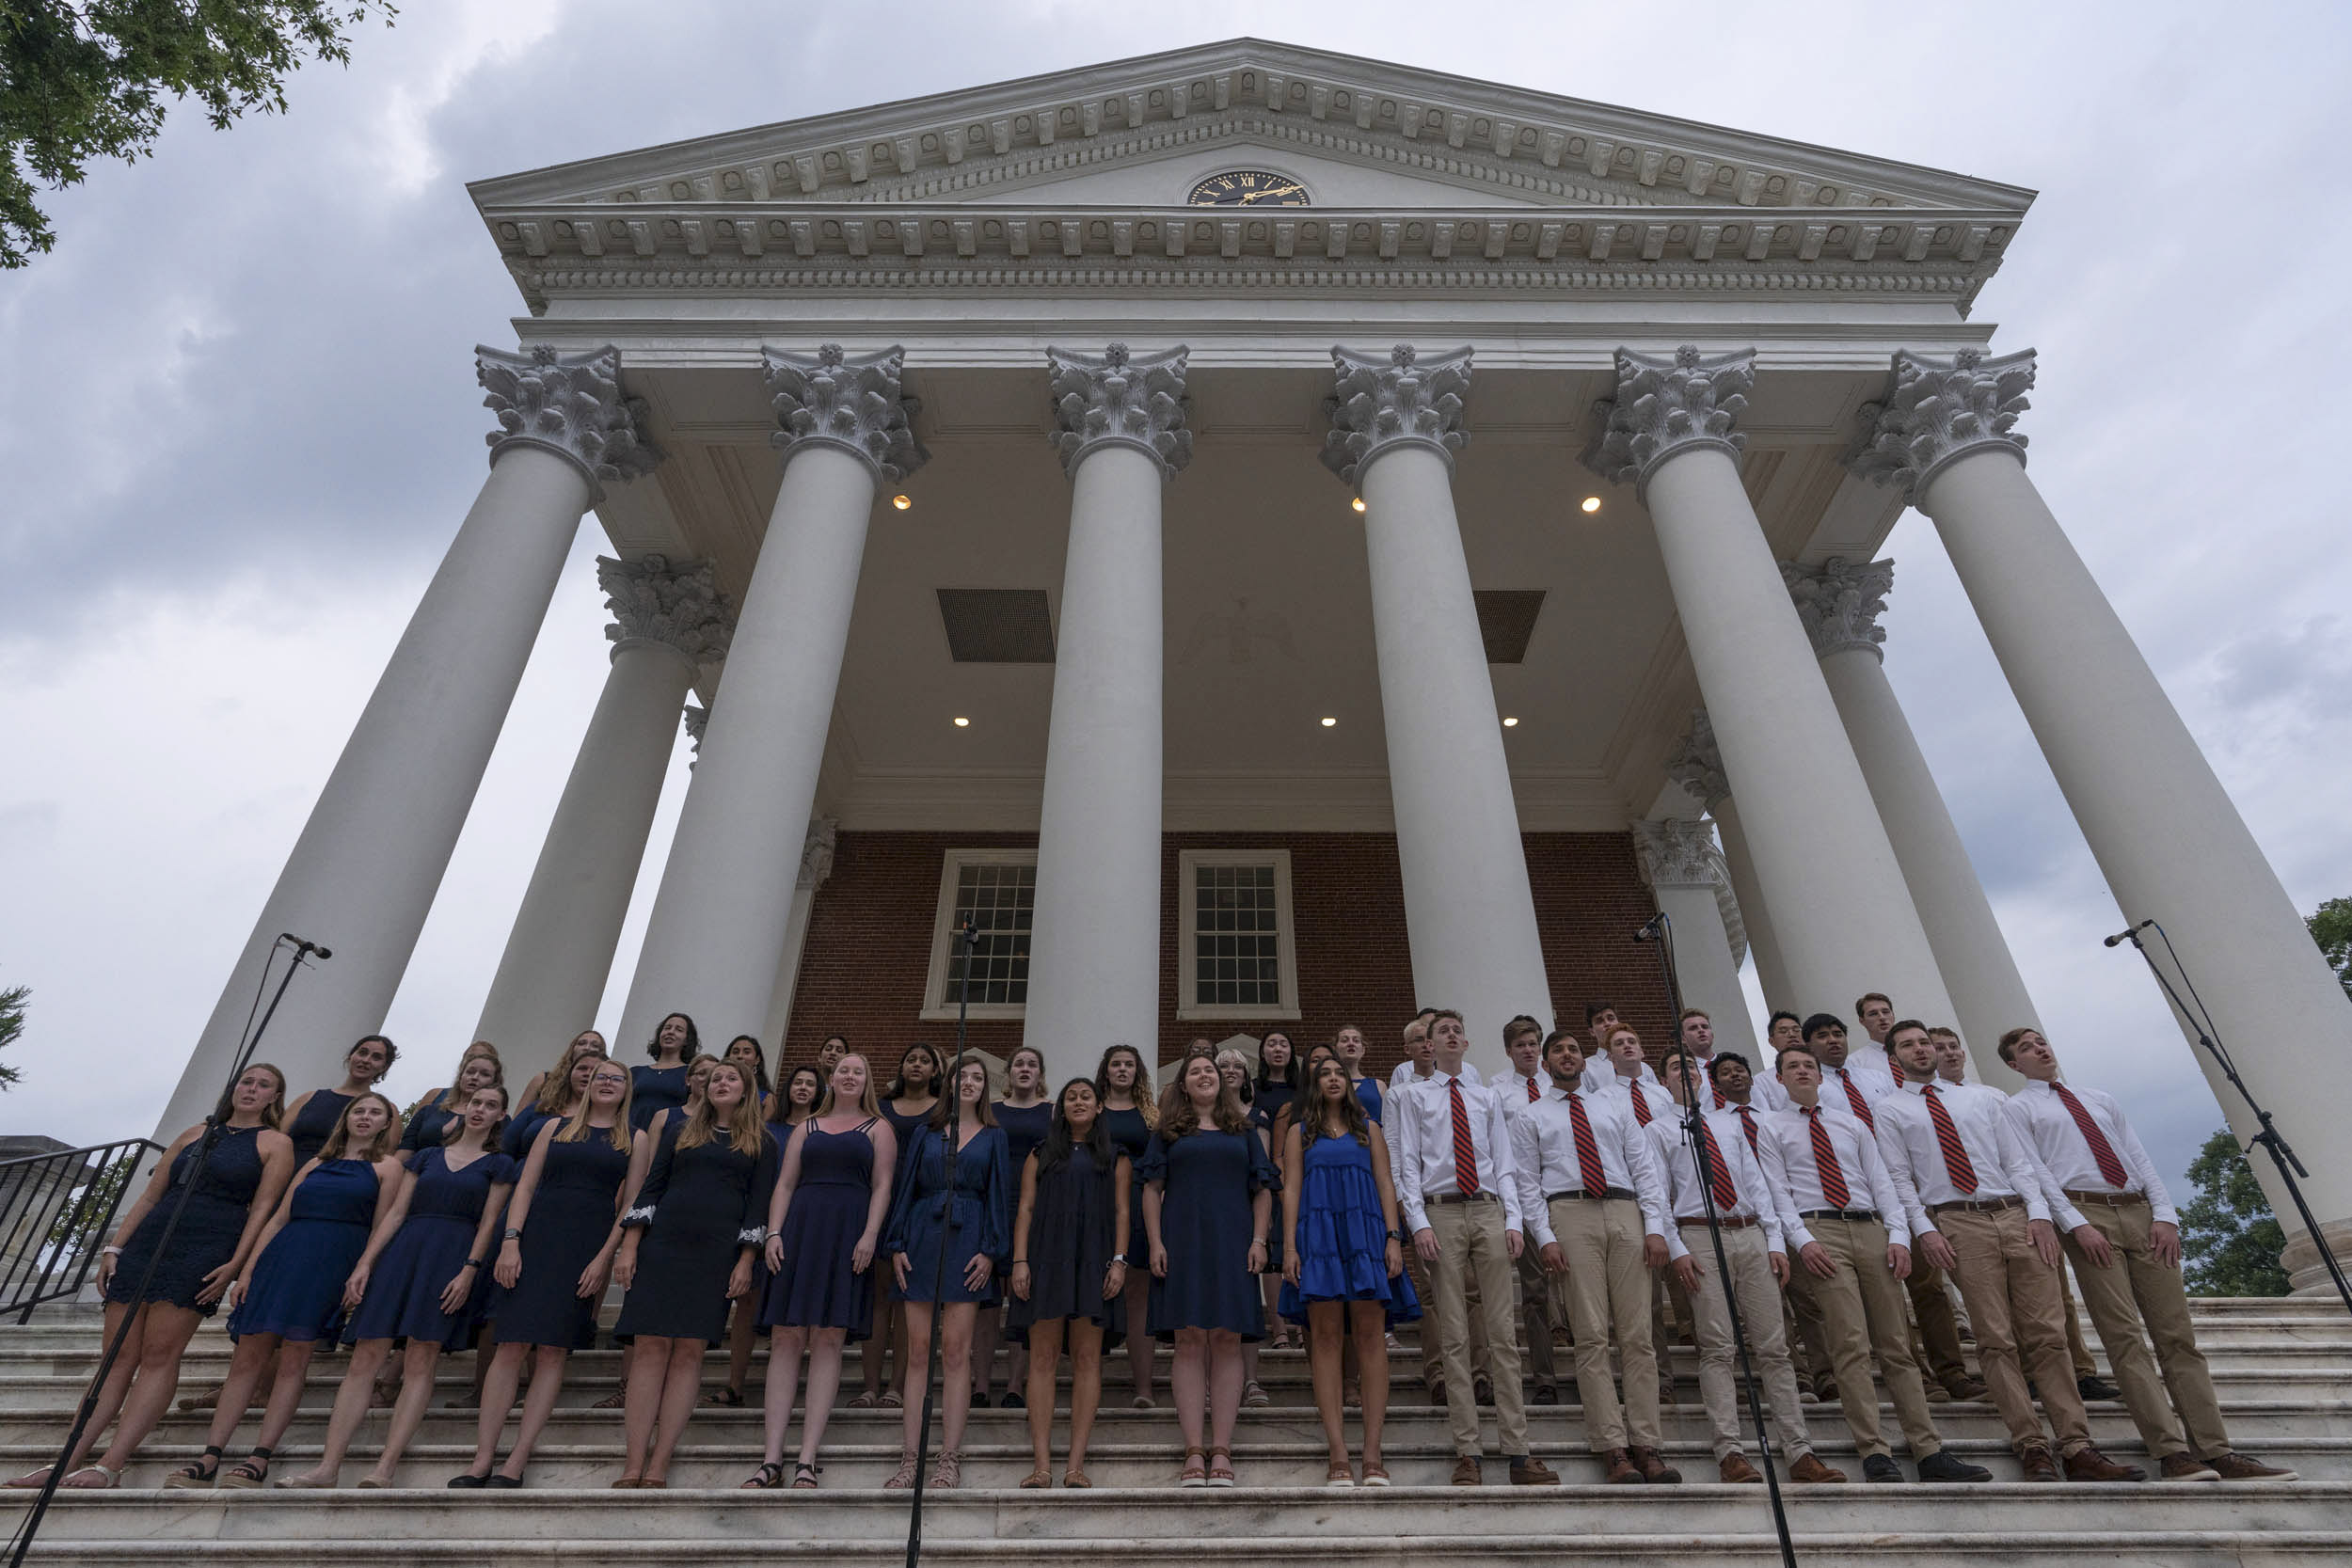 The University Singers stand on the steps of the Rotunda signing